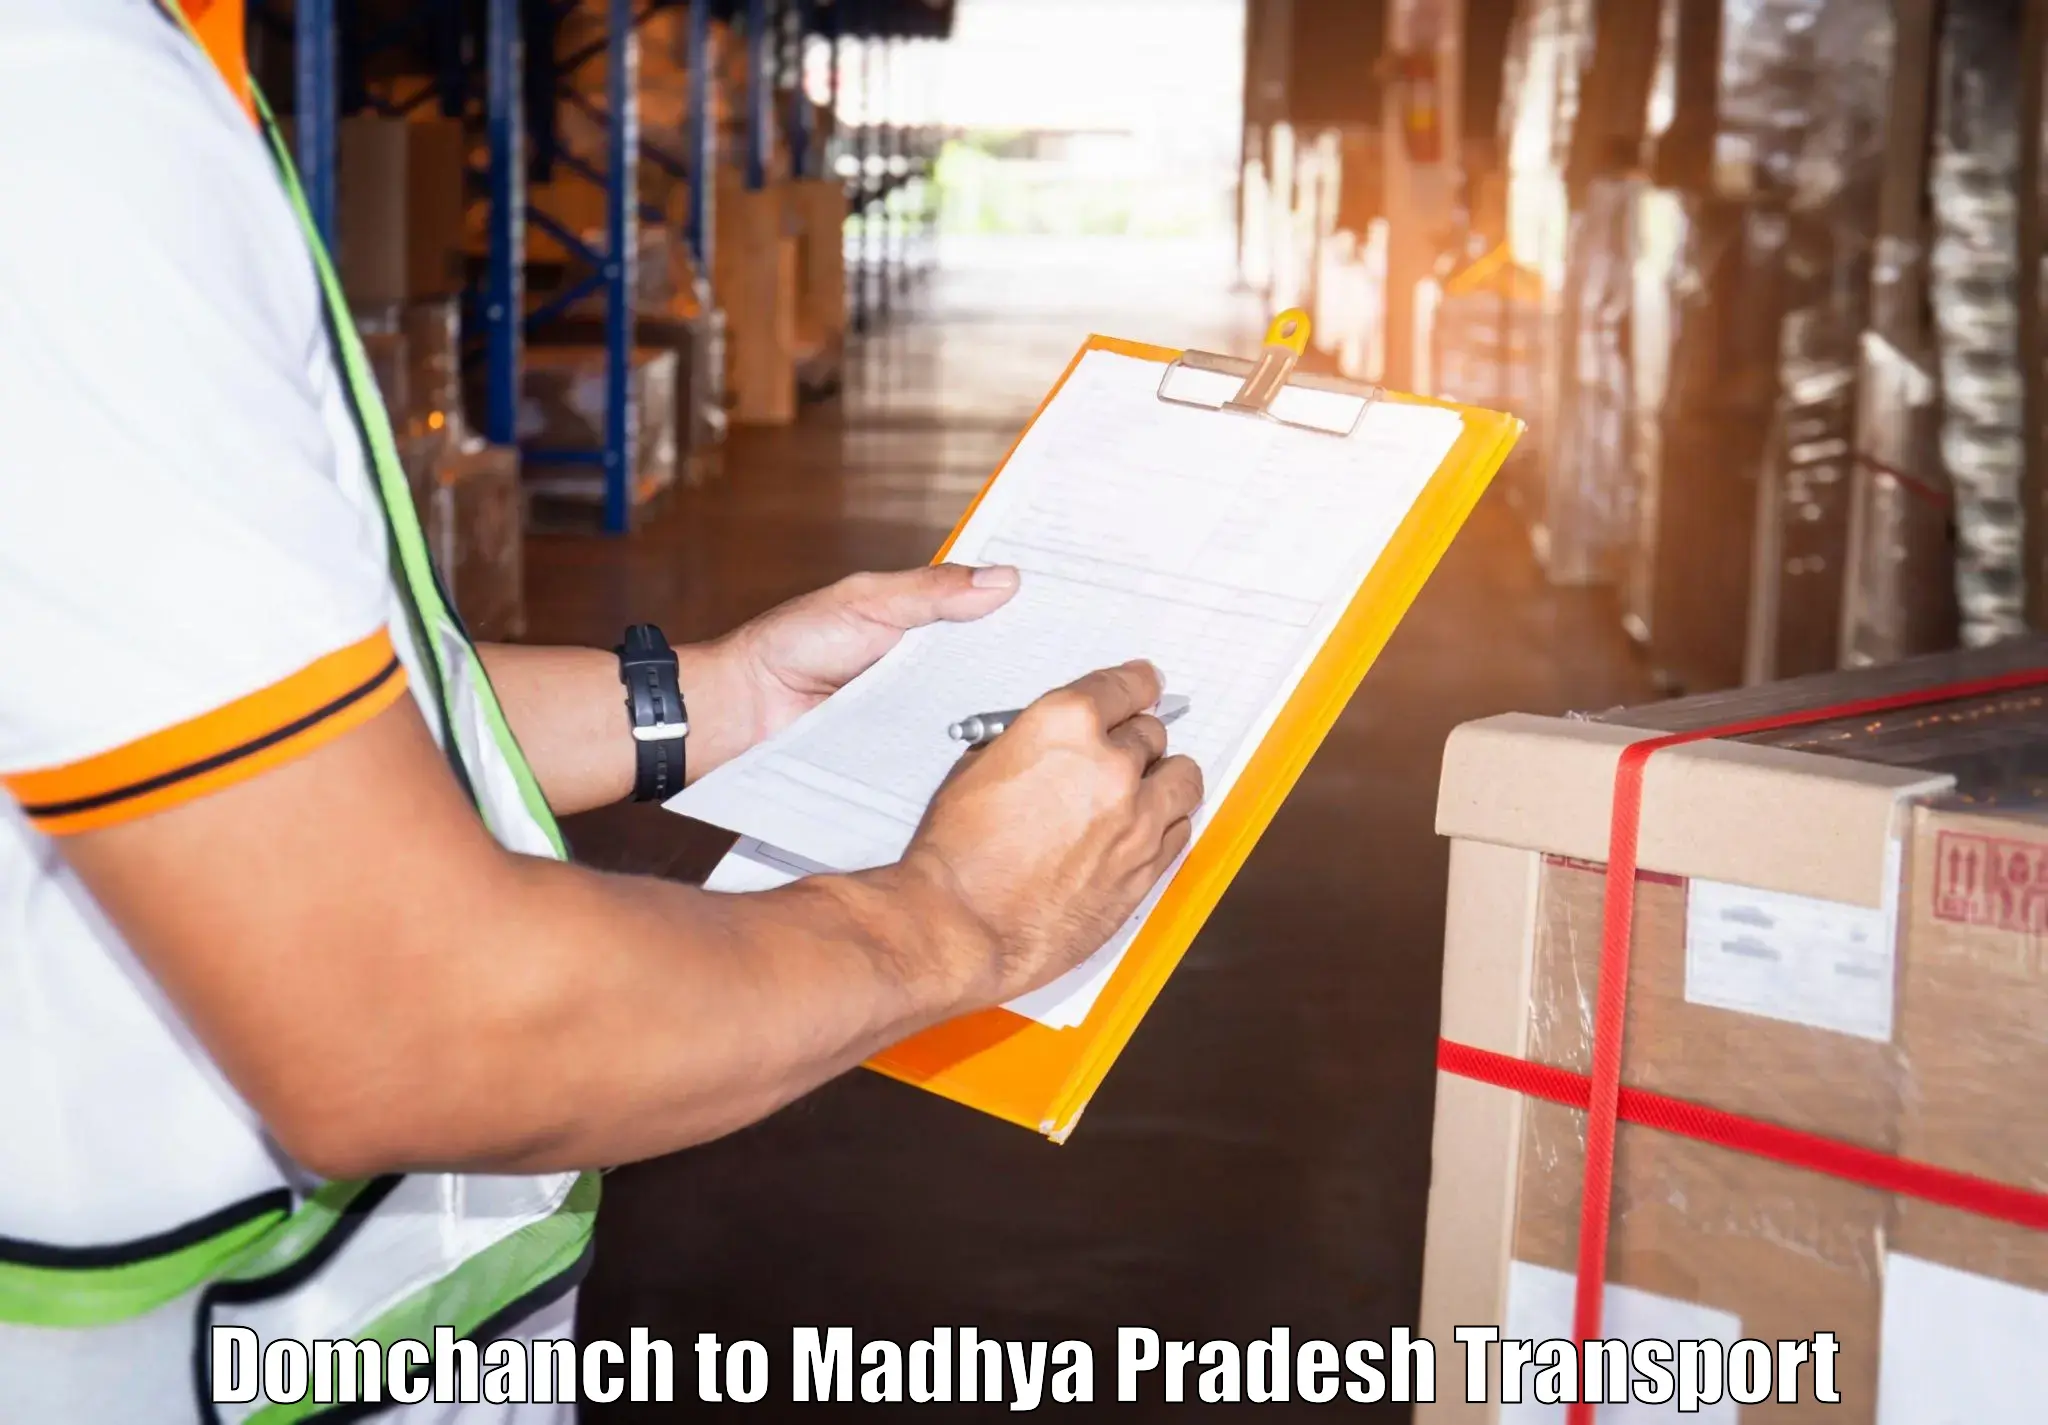 India truck logistics services in Domchanch to Khargone